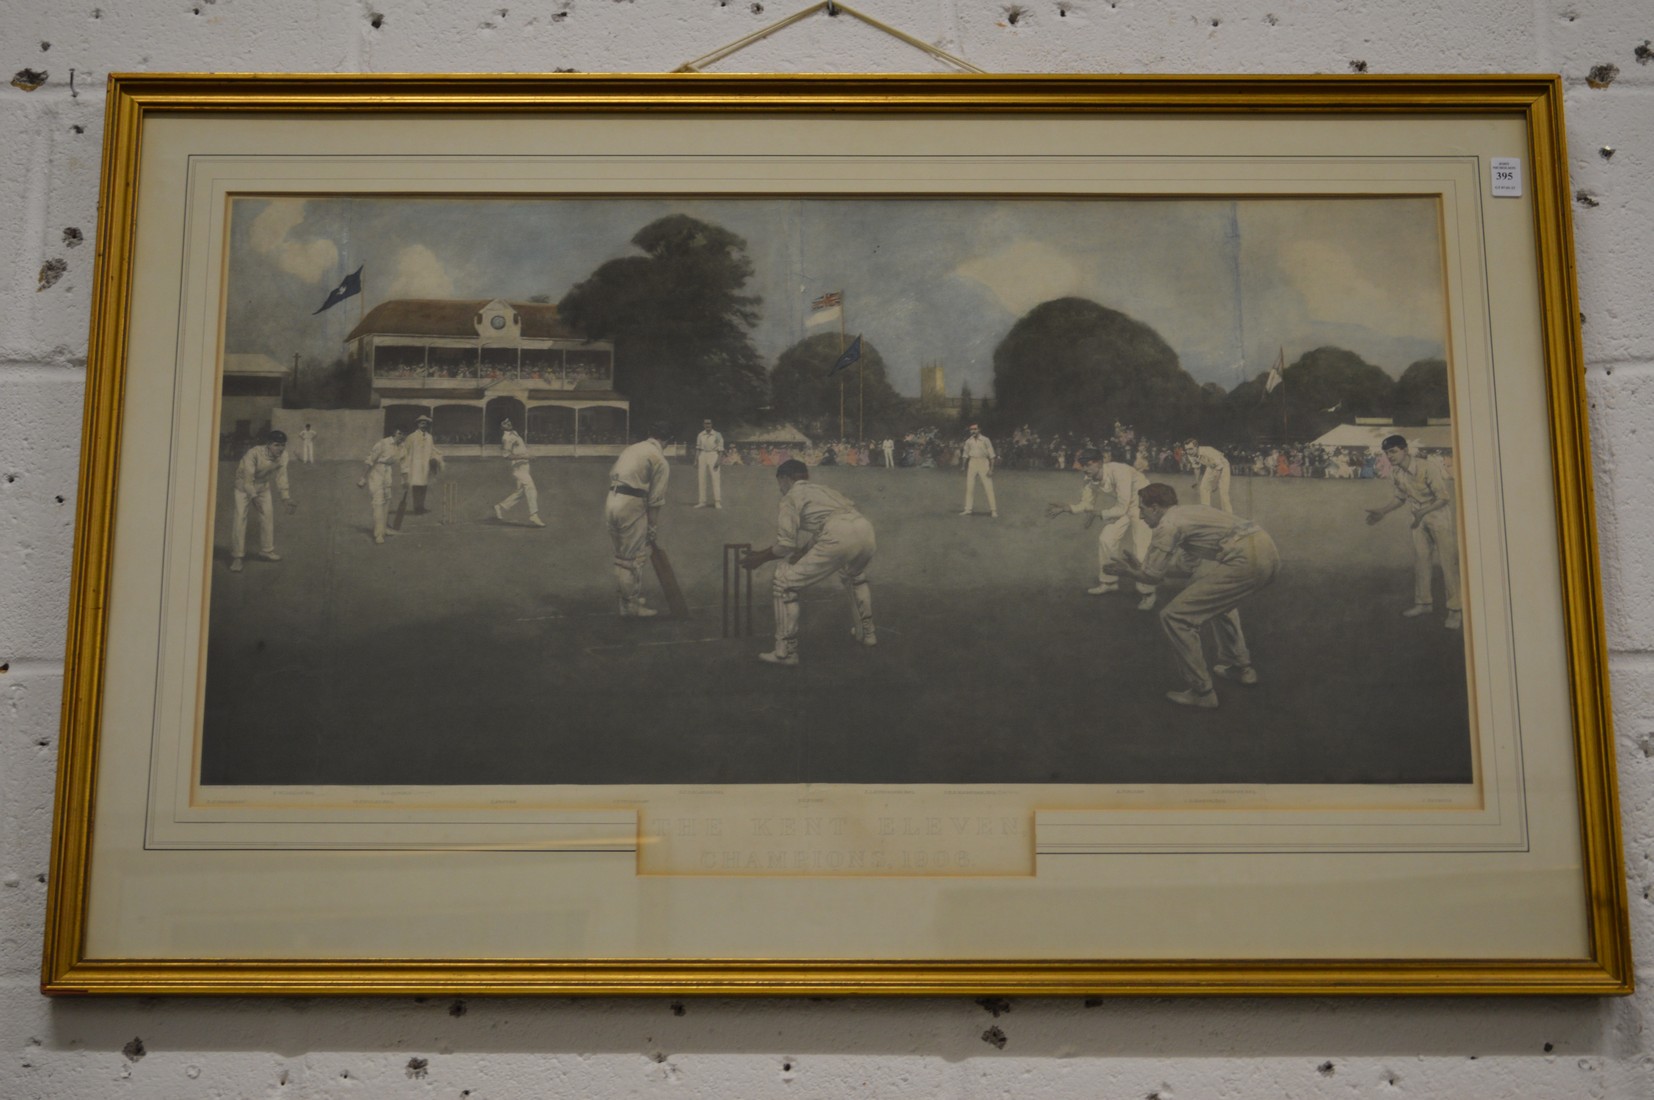 Cricketing interest, The Kent Eleven Champions 1906, colour engraving.